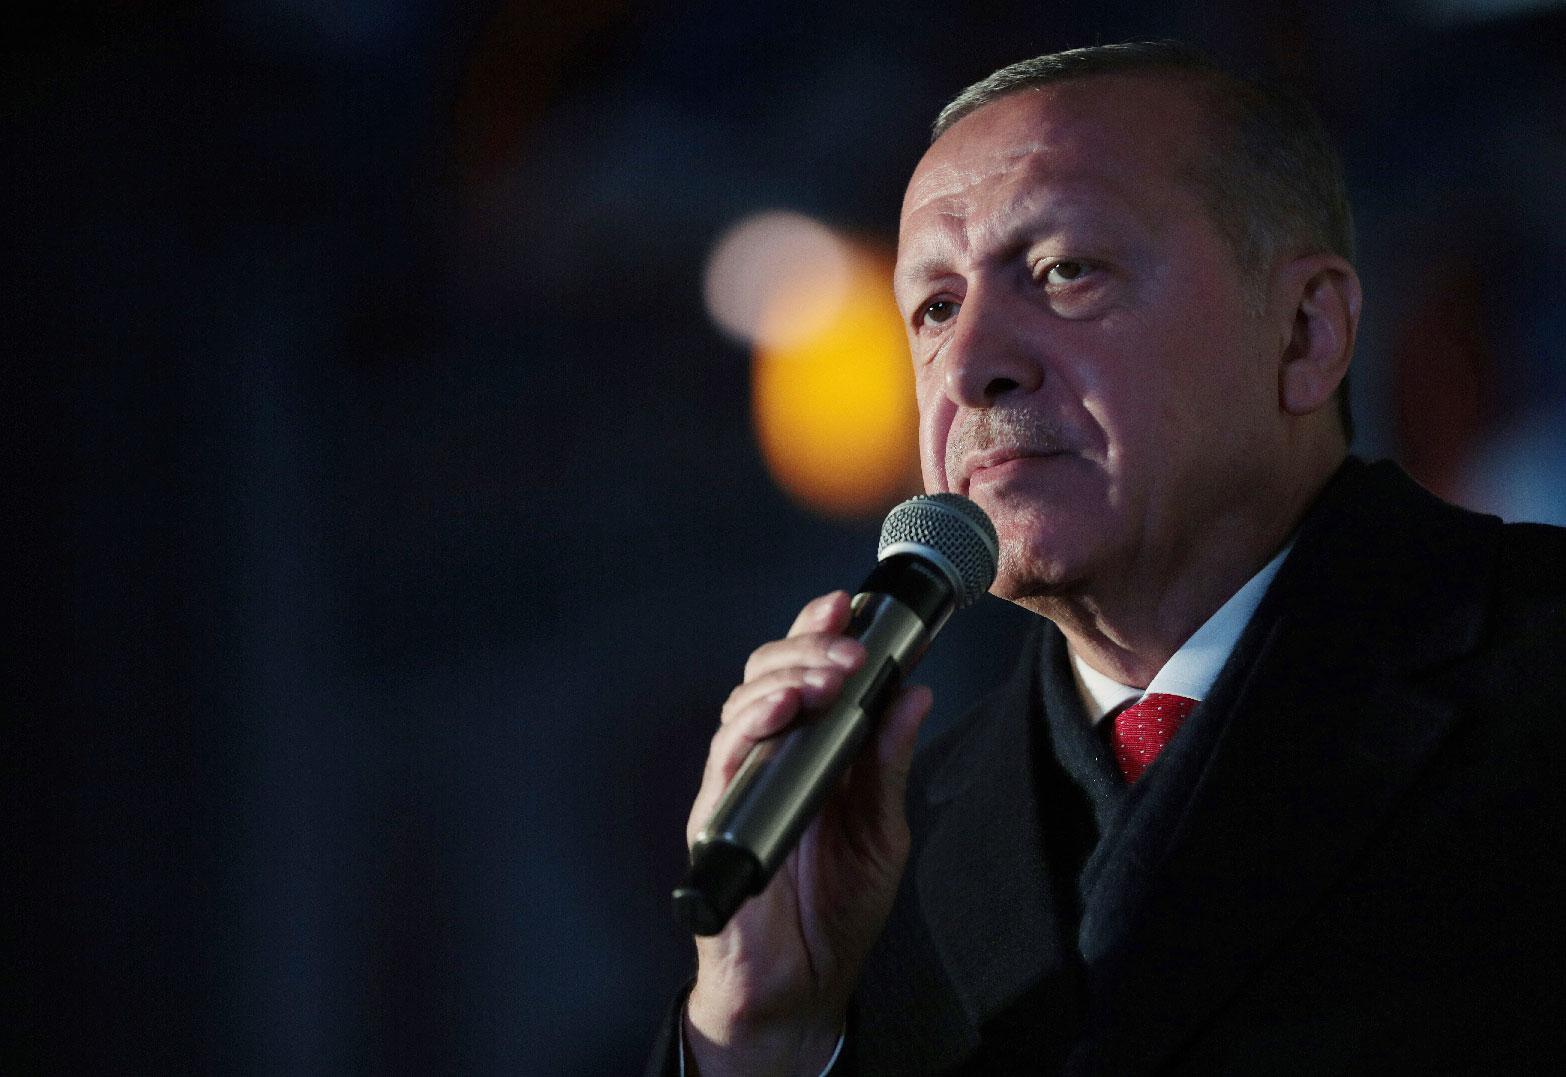 Turkish media is largely under the influence of President Erdogan's AK Party